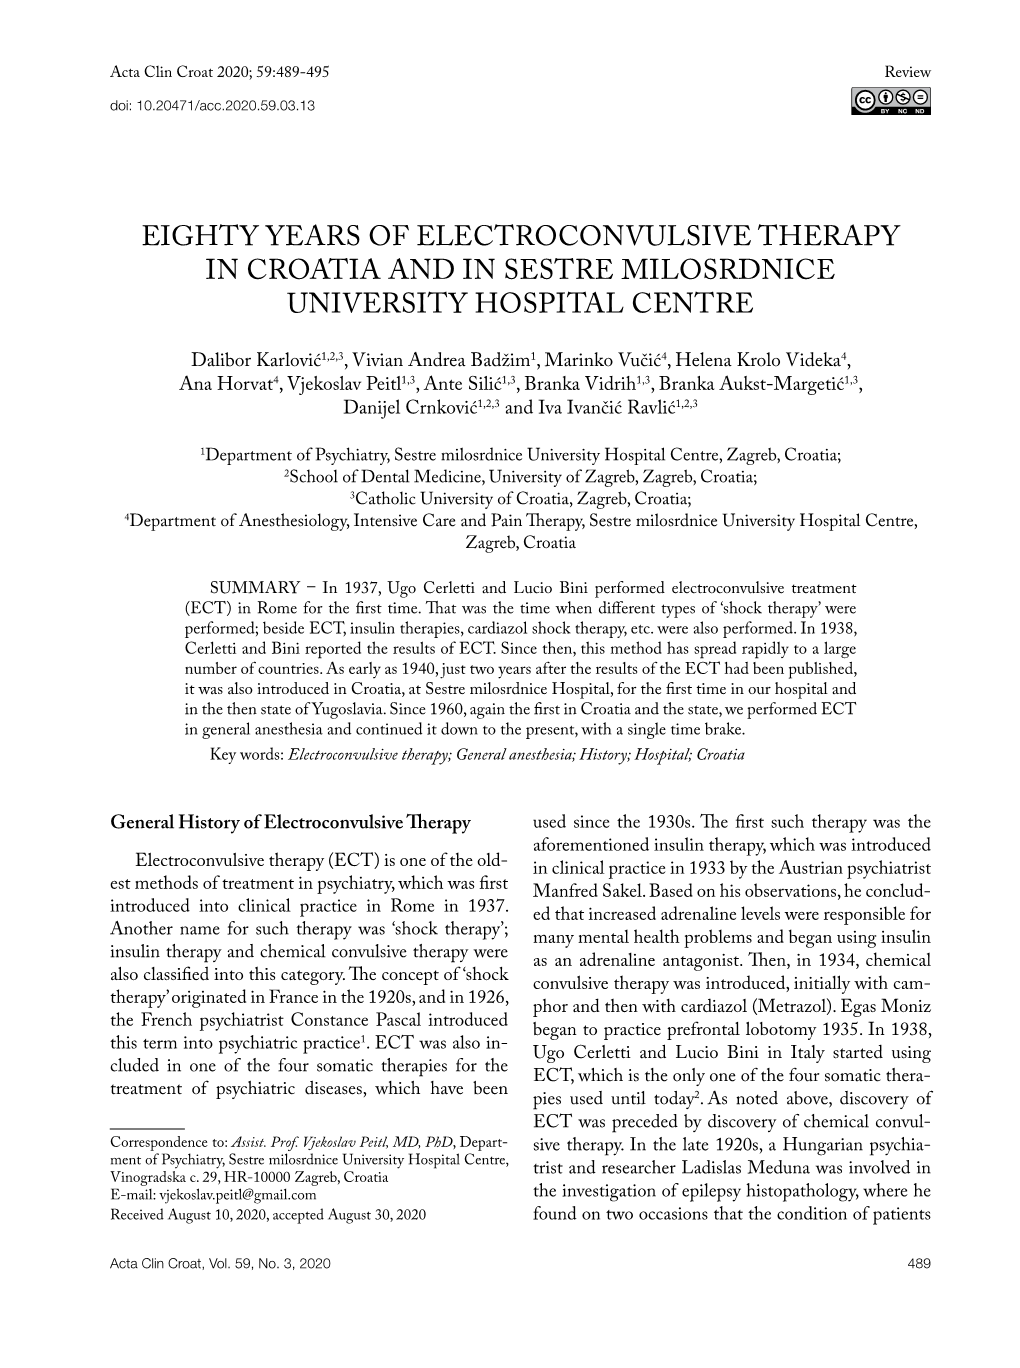 Eighty Years of Electroconvulsive Therapy in Croatia and in Sestre Milosrdnice University Hospital Centre